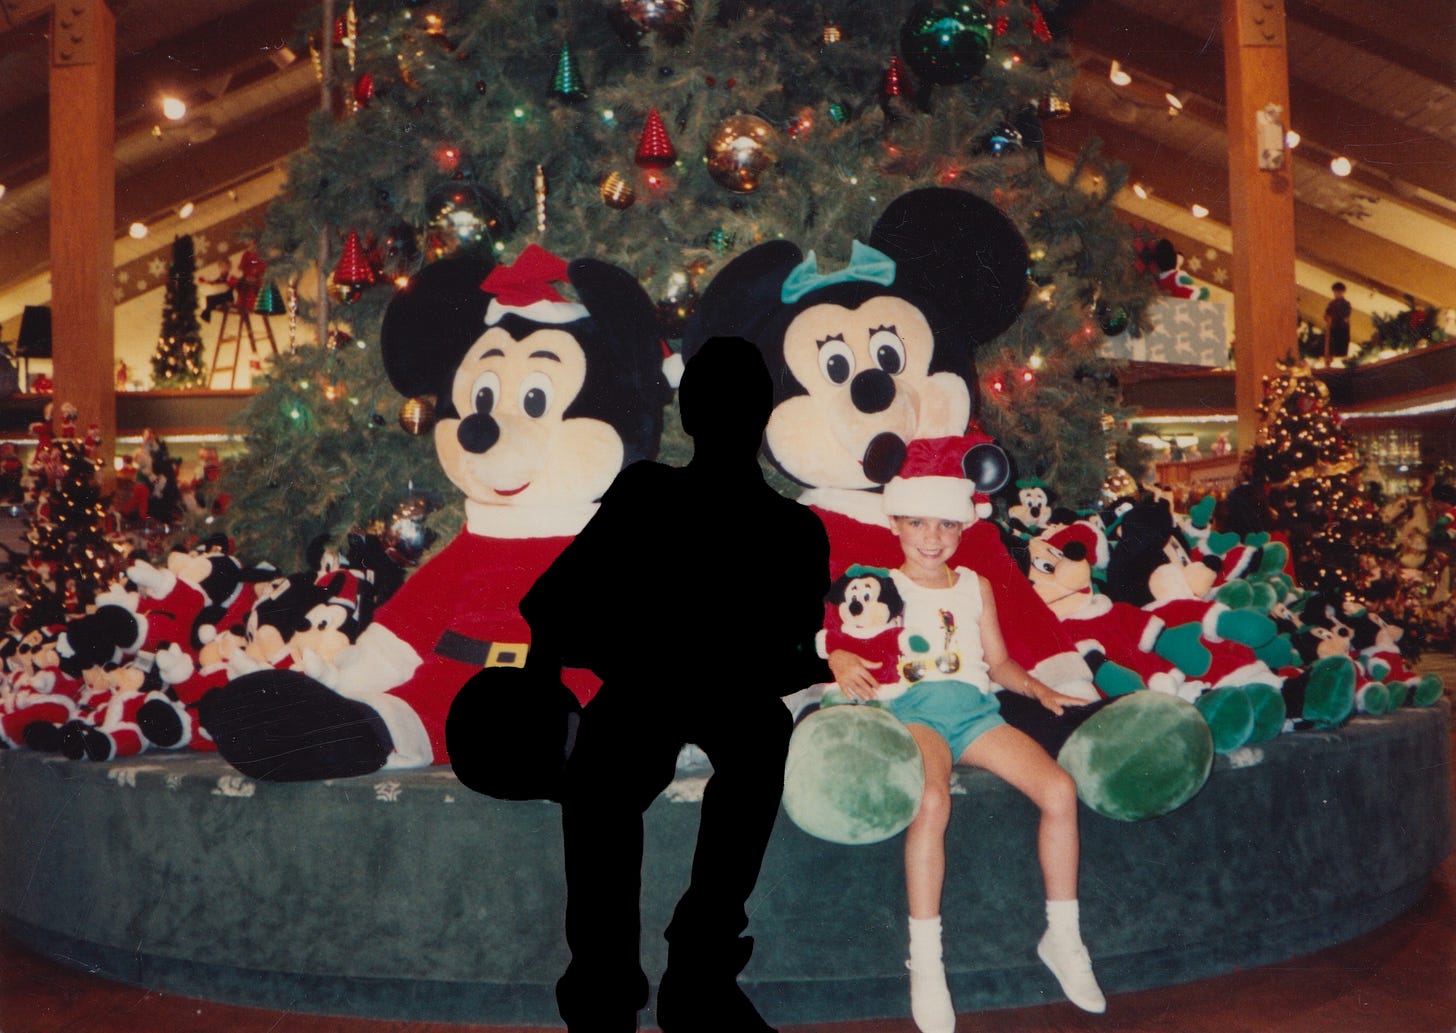 My brother and I sit on a Disney World display of stuffed Mickey and Minnie's during the holidays. He is silhouetted in black and I am around 8 years old.